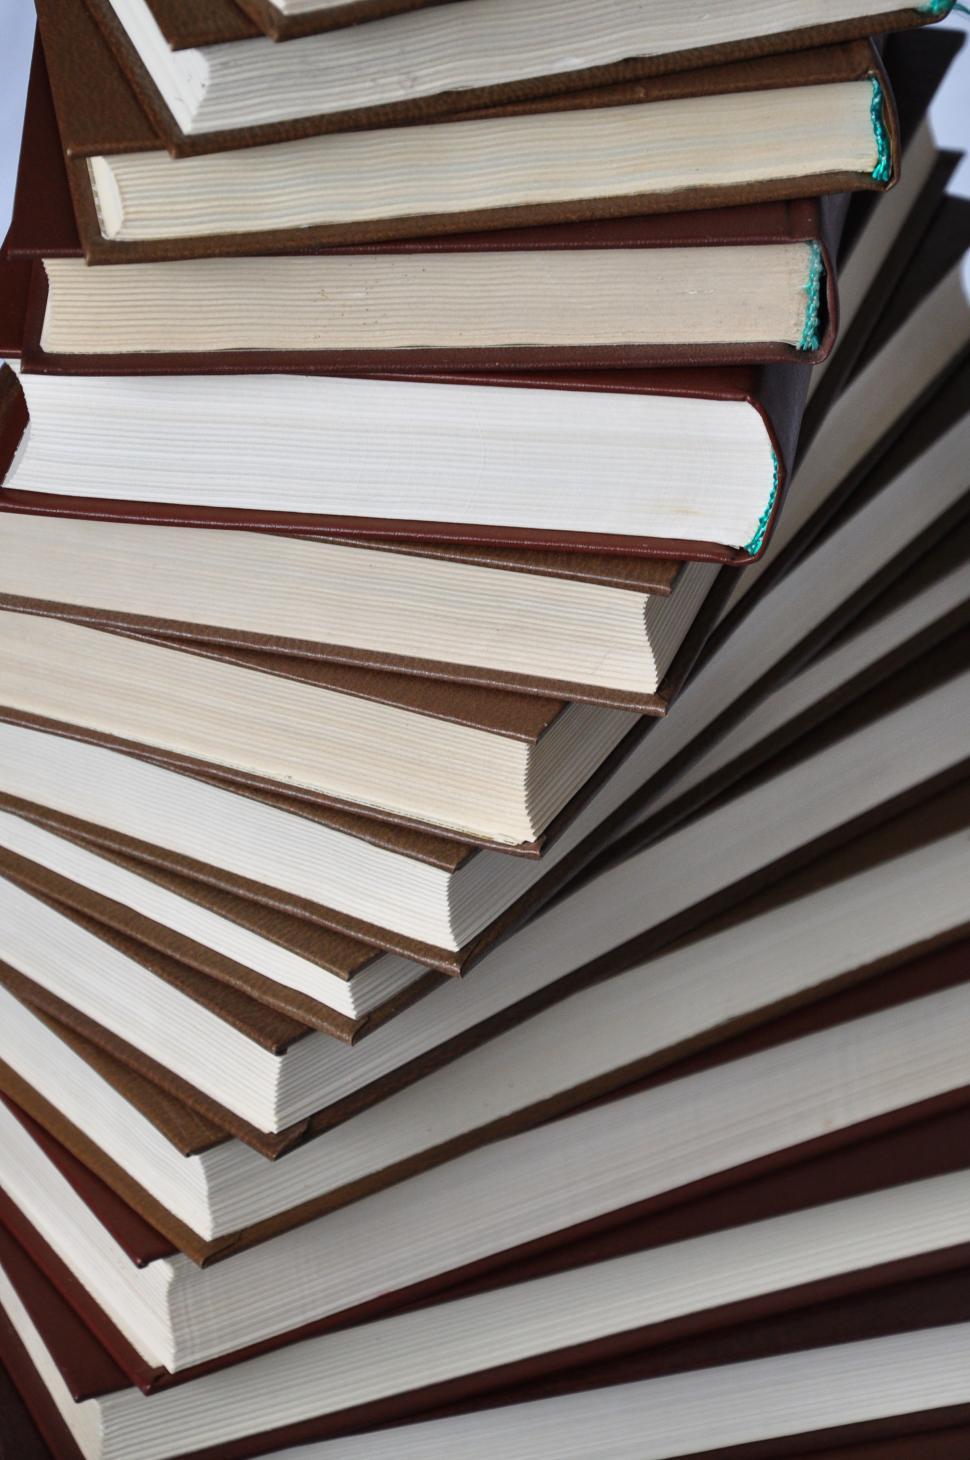 Free Image of Stacked books 